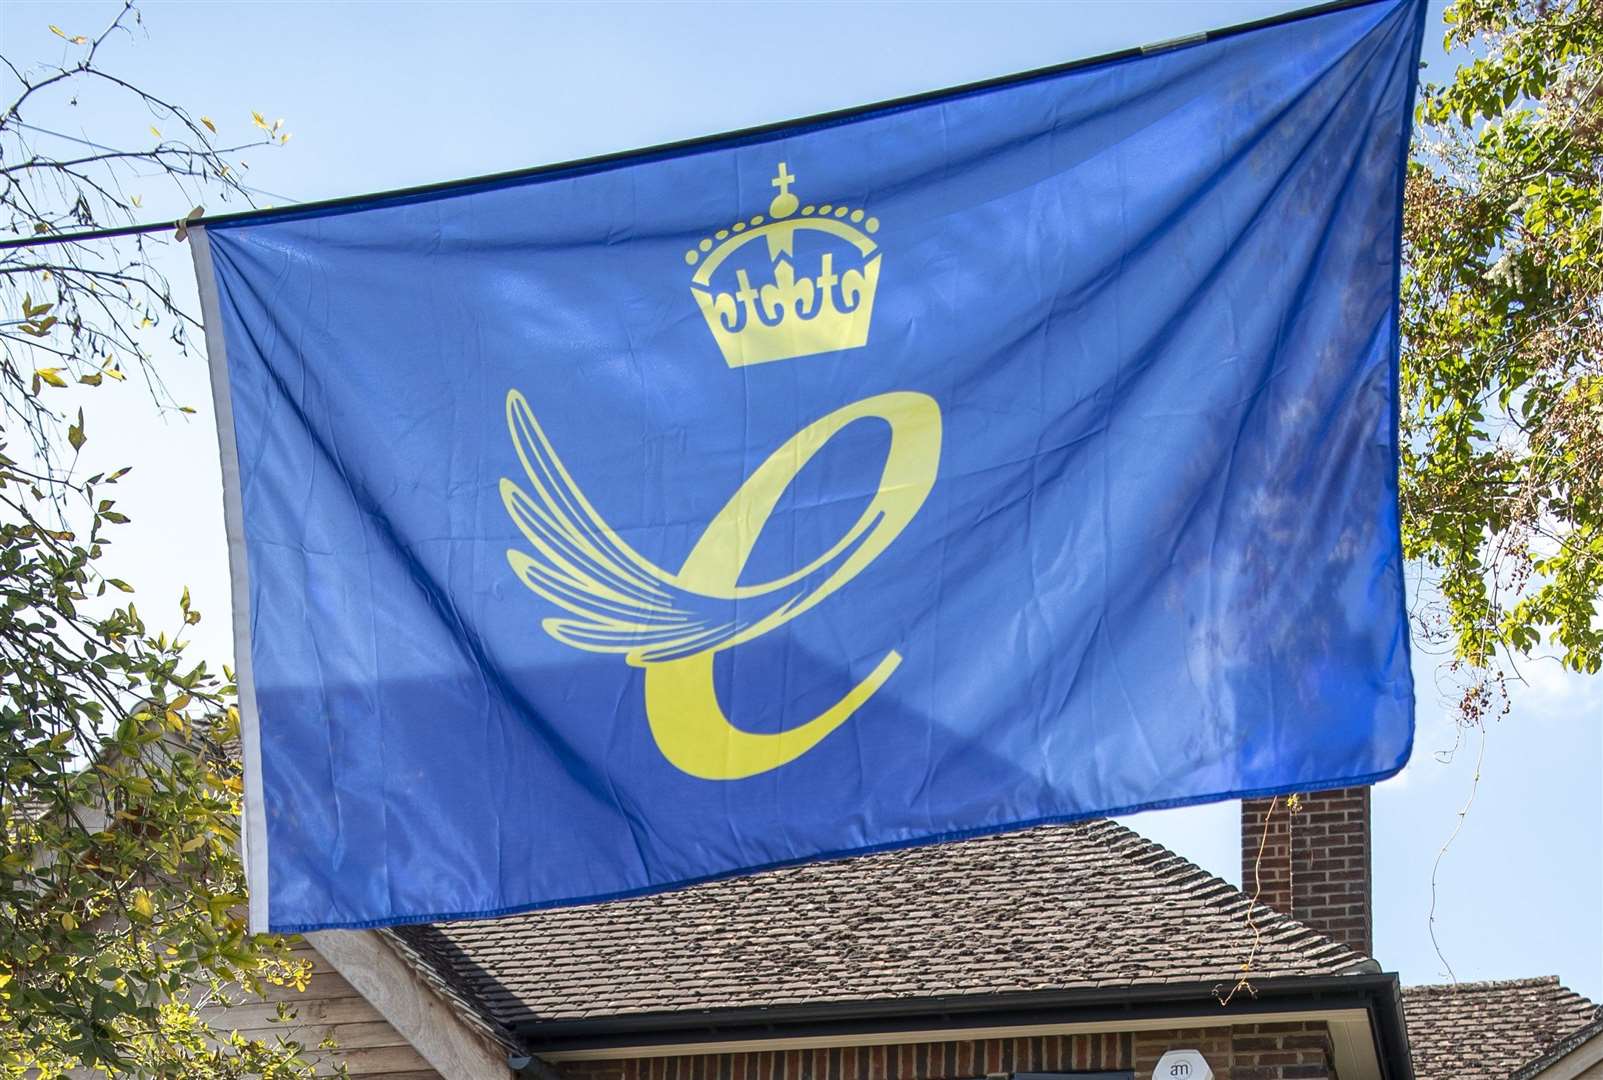 Winners can fly the Queen's Award for Enterprise flag from their headquarters